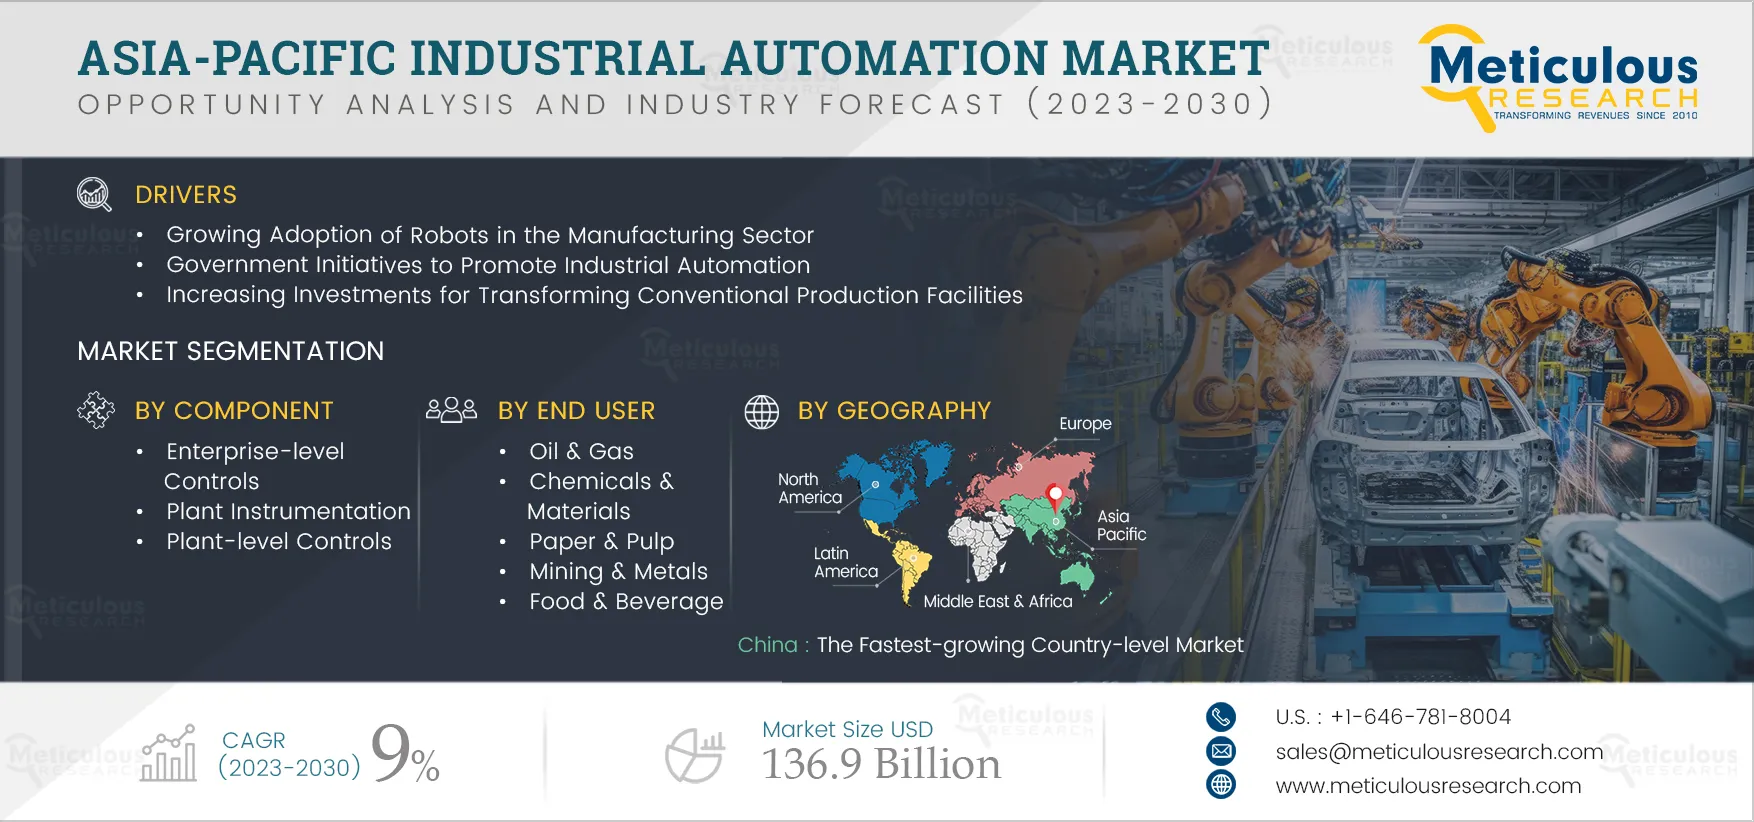 Asia-Pacific Industrial Automation Market